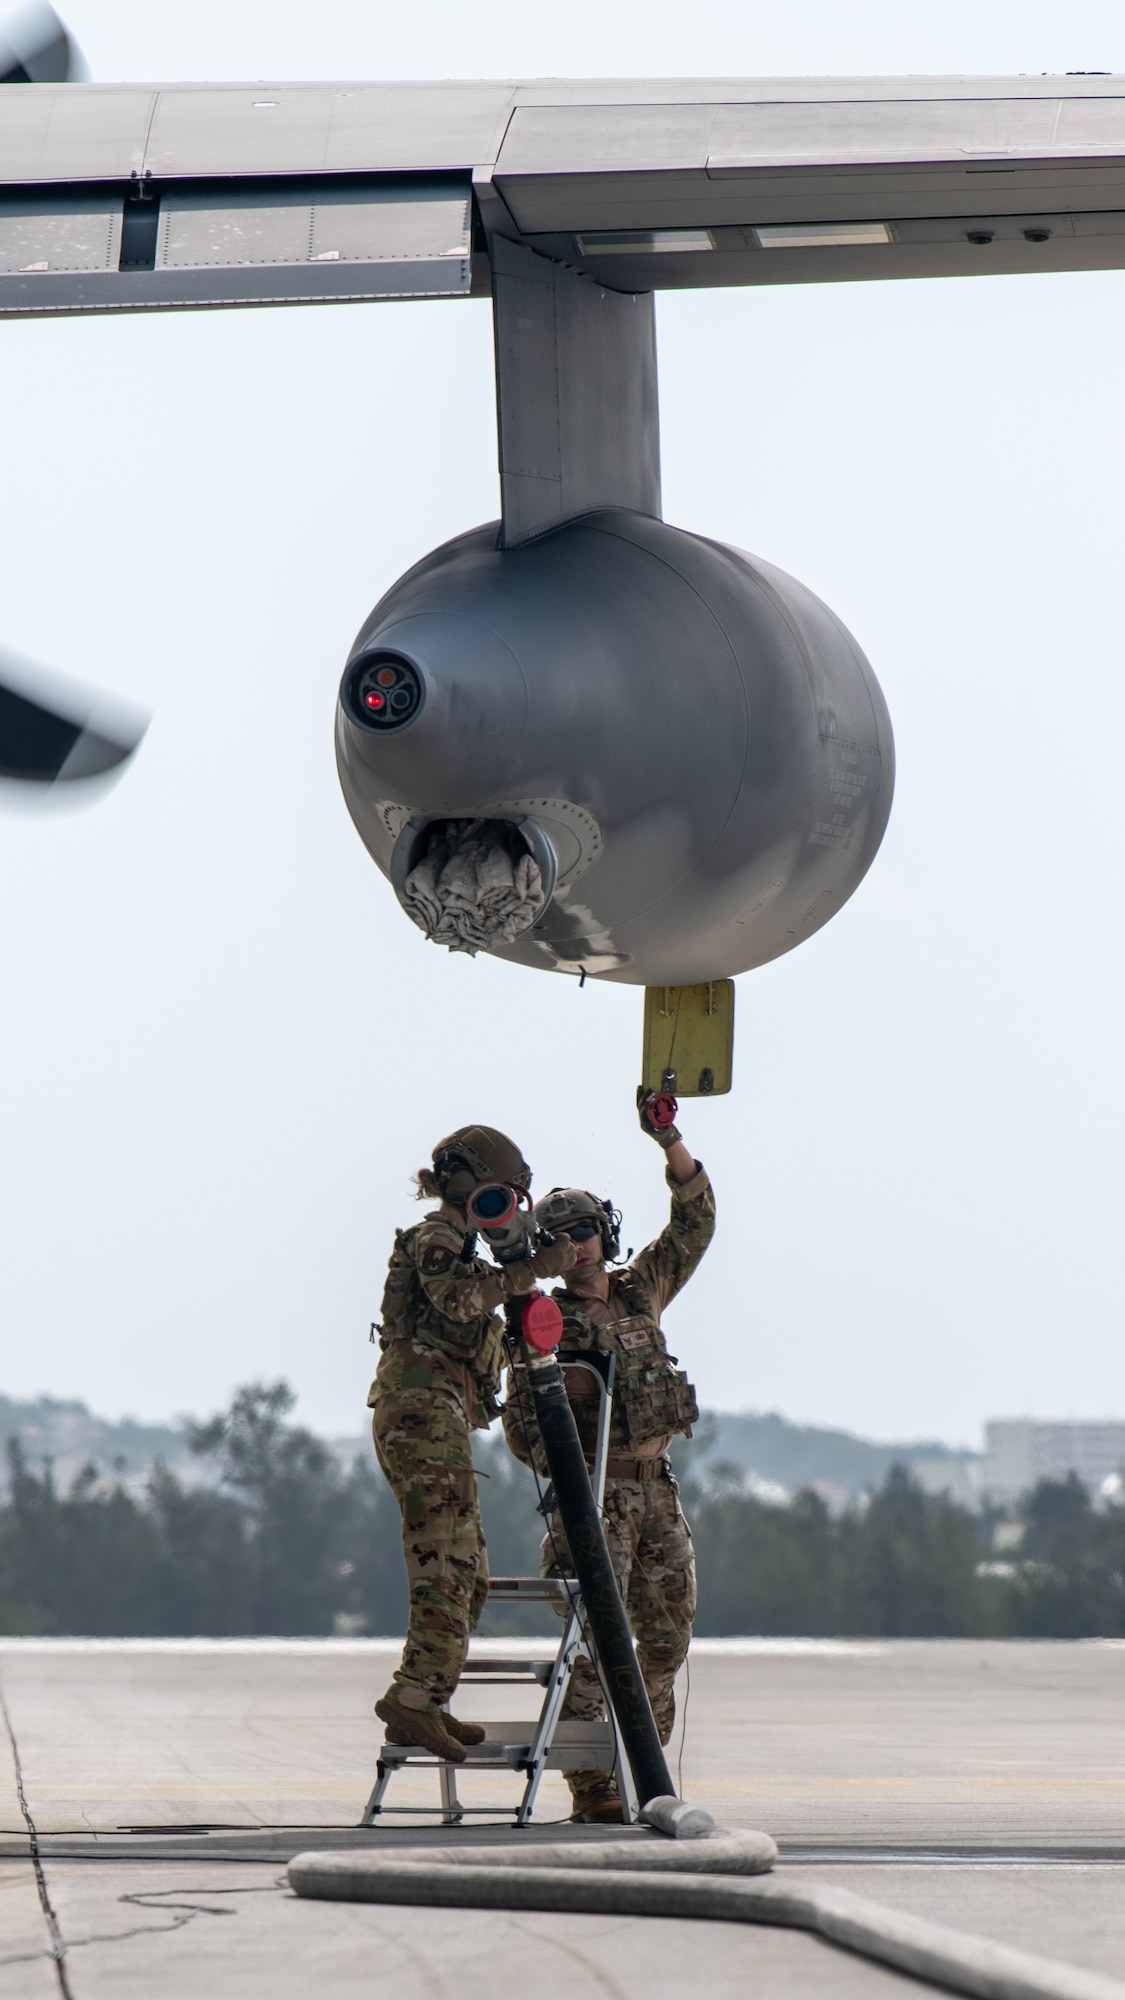 Two Airmen connect a hose to a fuel container of a transport plane.